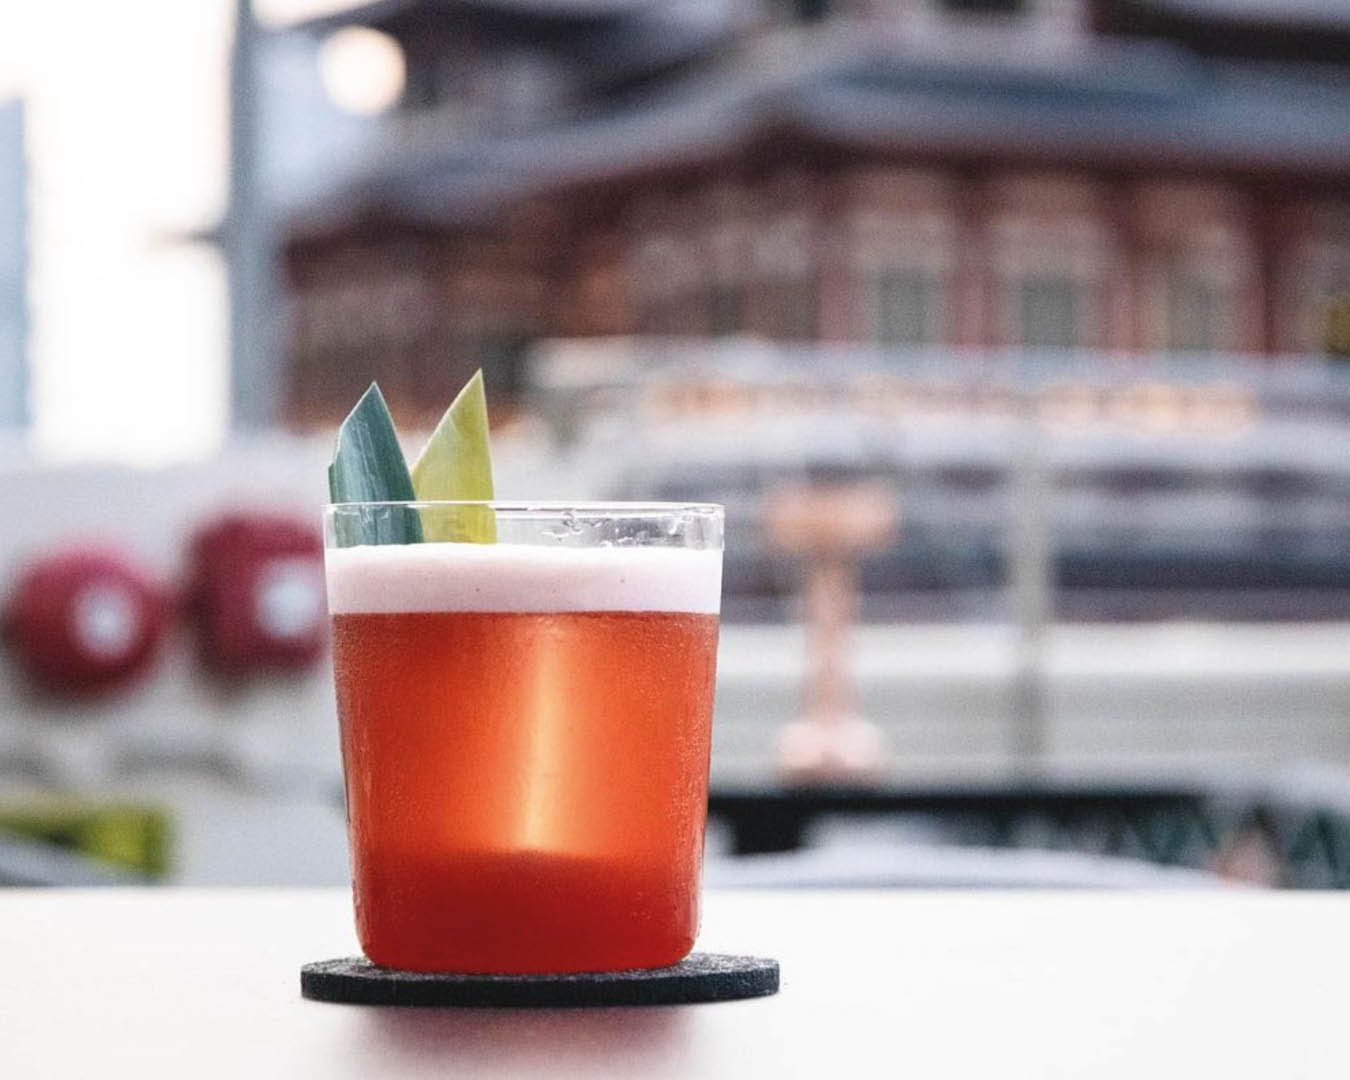 A short cocktail served at Mortar & Pestle rooftop bar in Singapore.